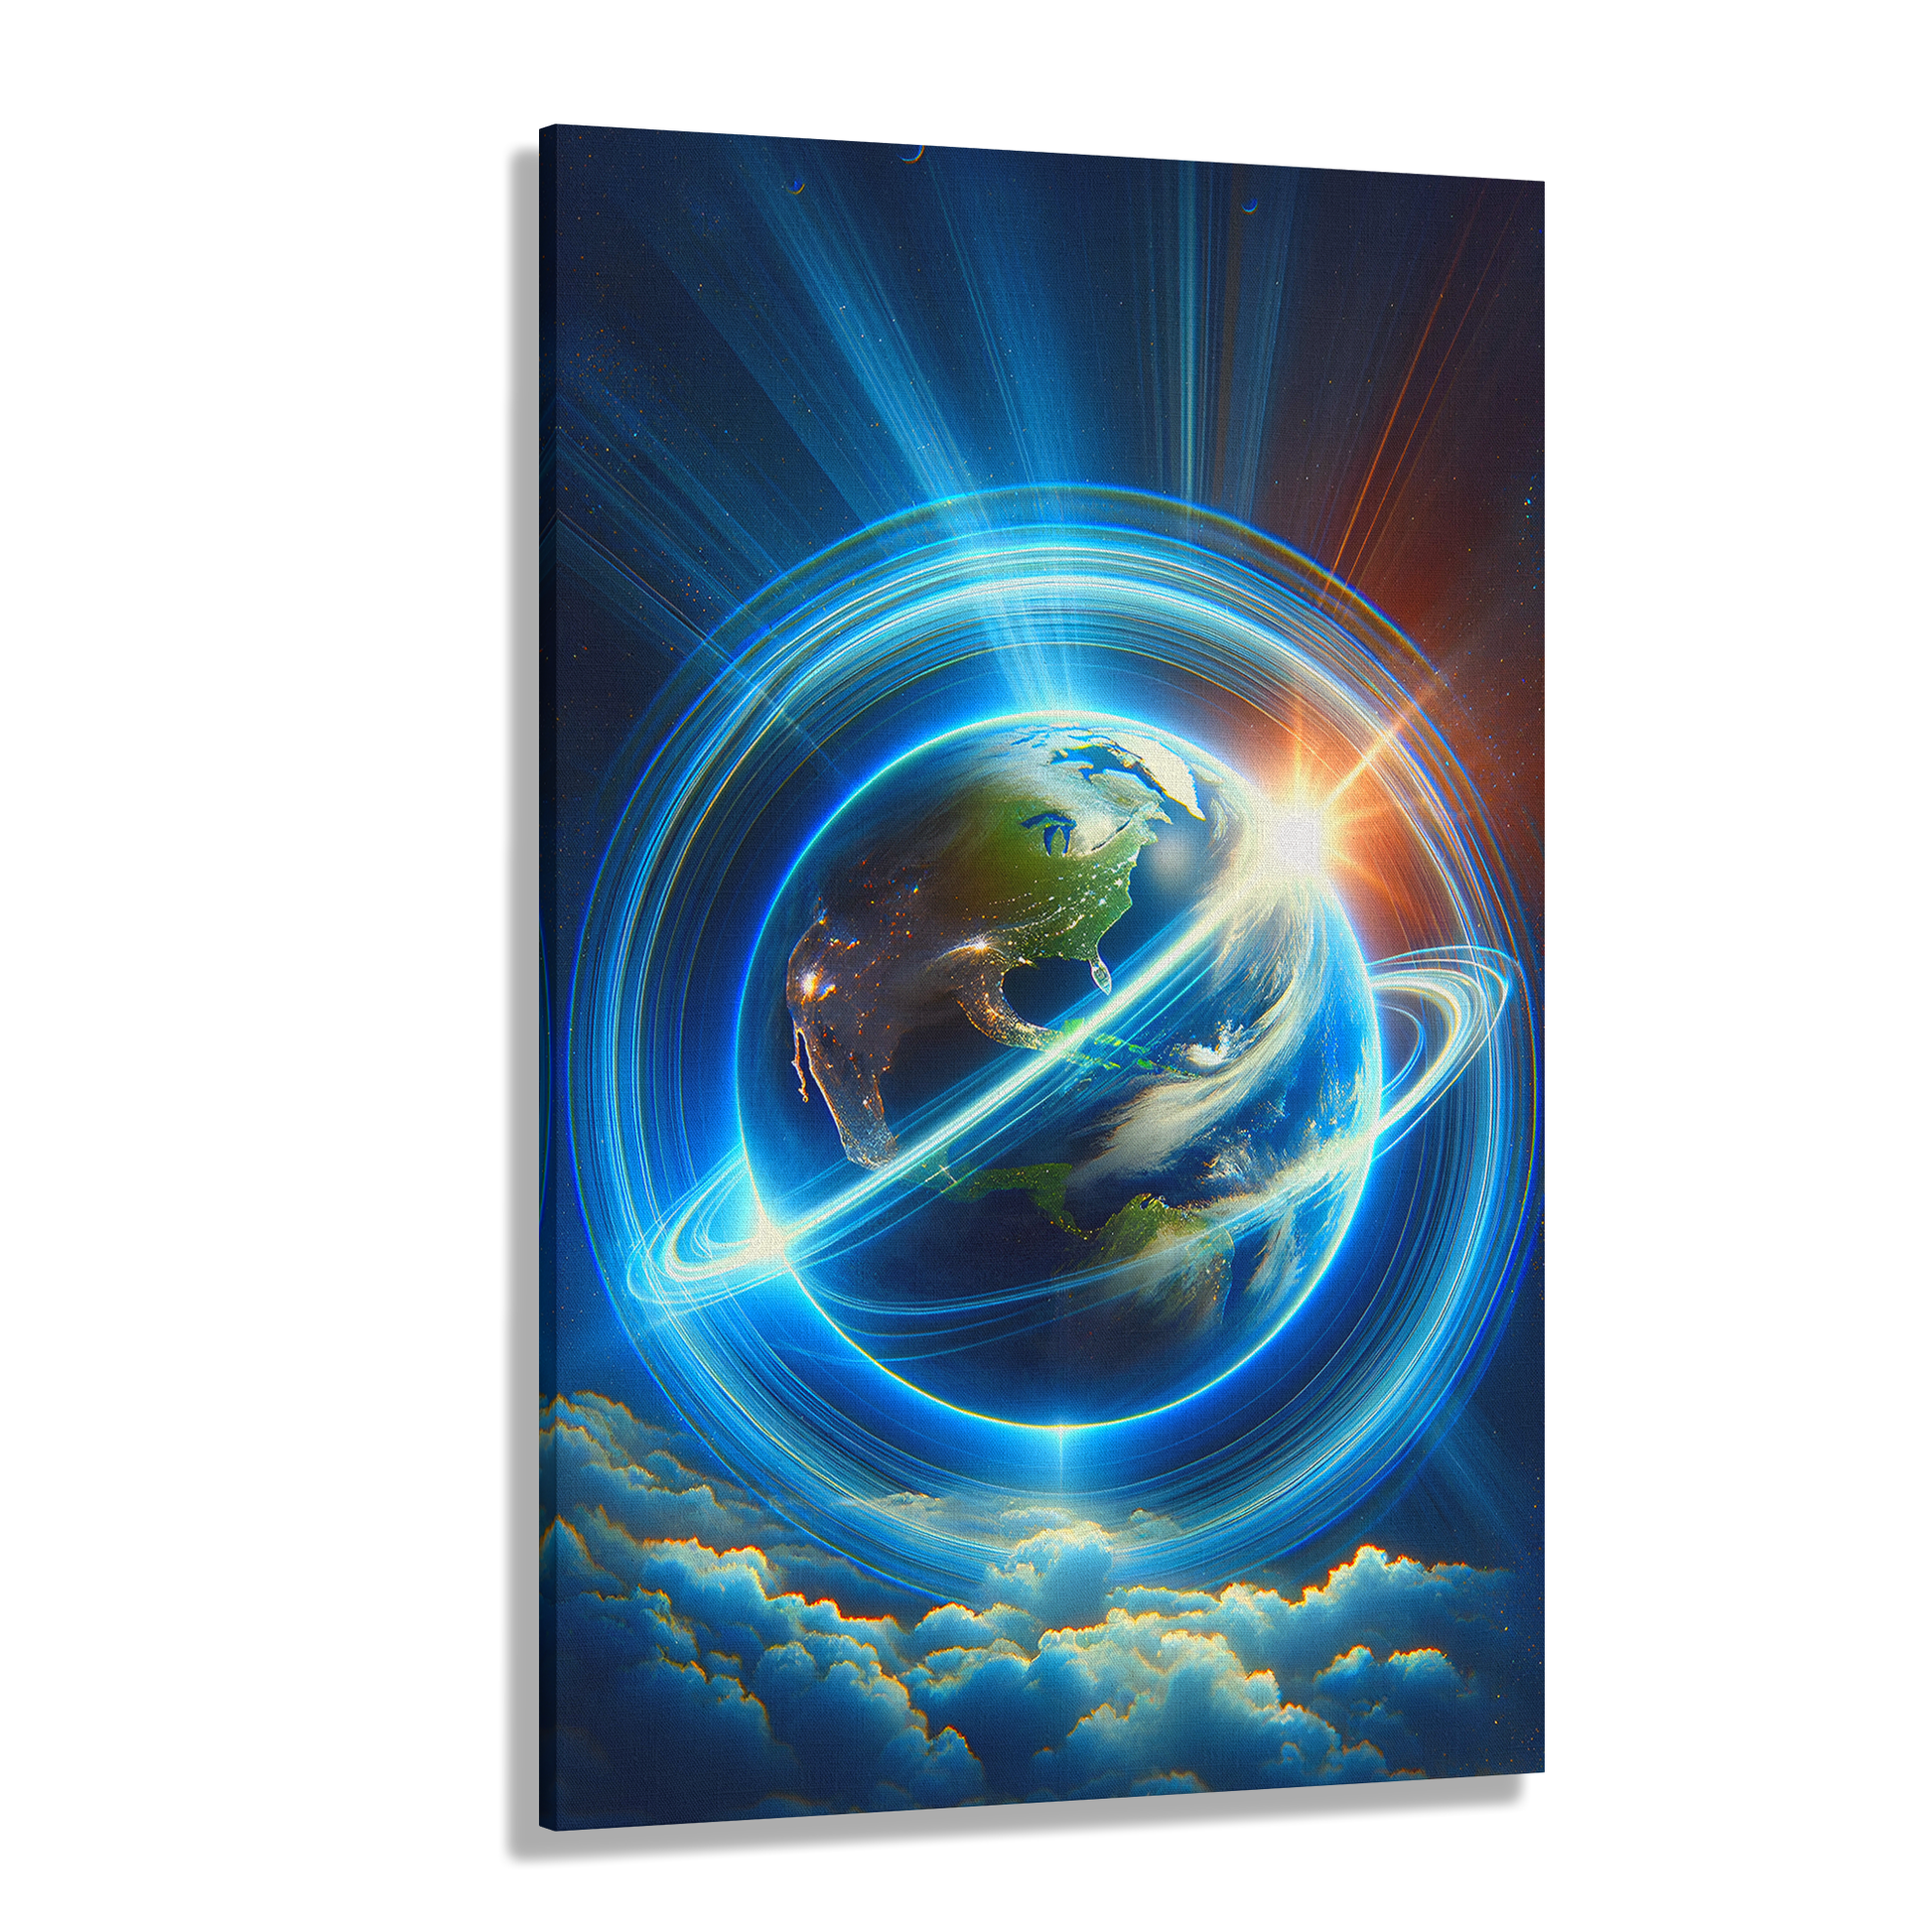 Luminous Earth Odyssey (Canvas)Luminous Earth Odyssey (Canvas  Matte finish, stretched, with a depth of 1.25 inches)
Struggling with low-quality canvases? Switch to RimaGallery! Our canvases are mRimaGallery